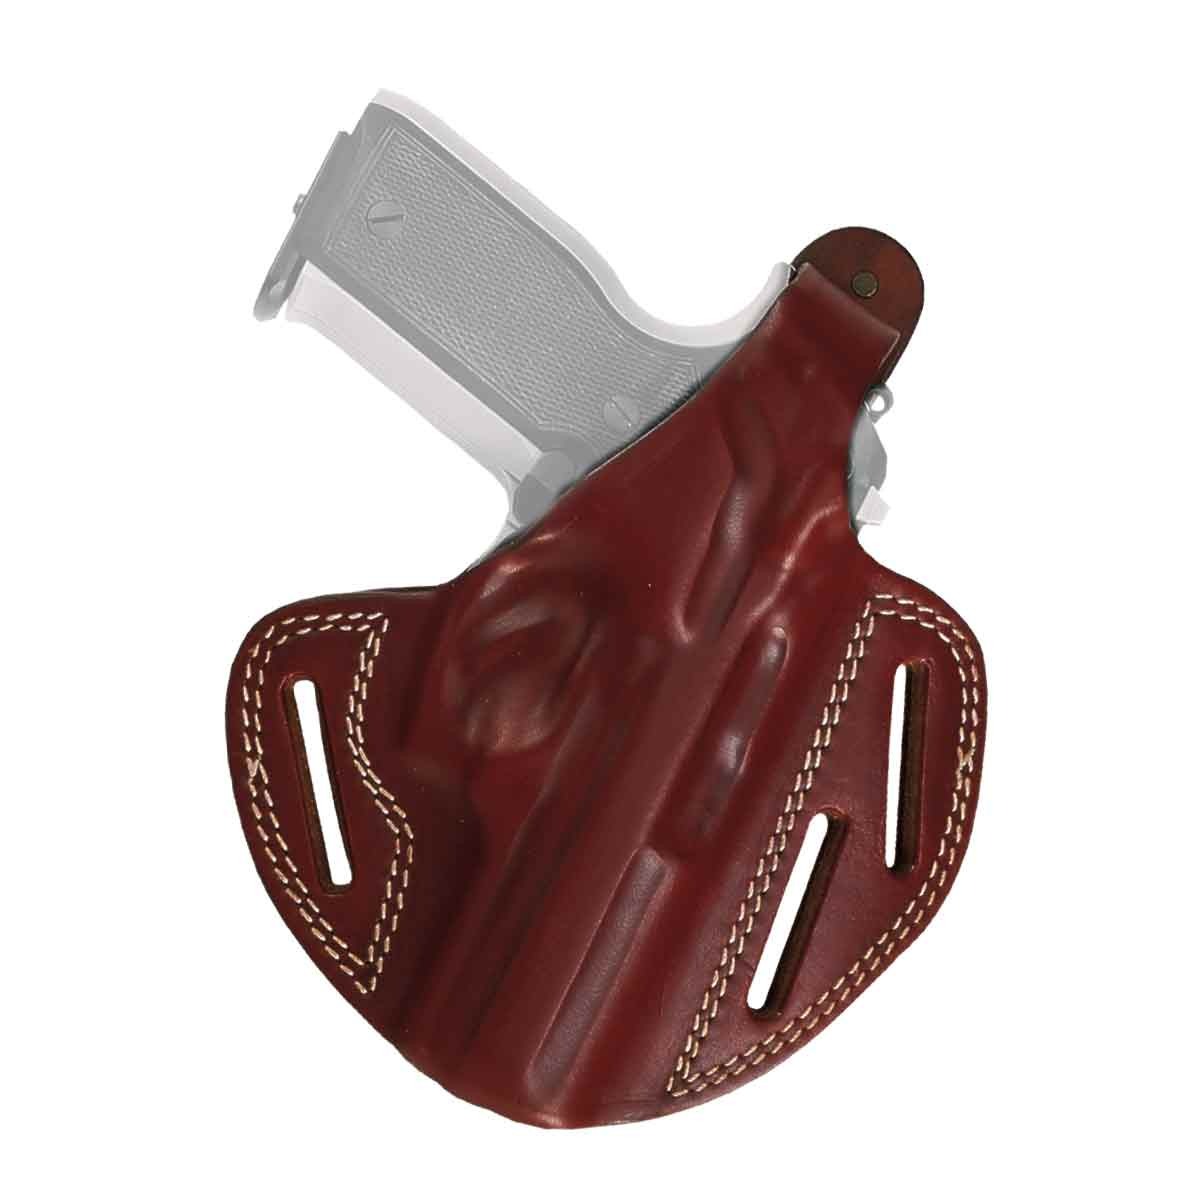 Pancake holster with two carrying positions CZ 83-Brown-Left